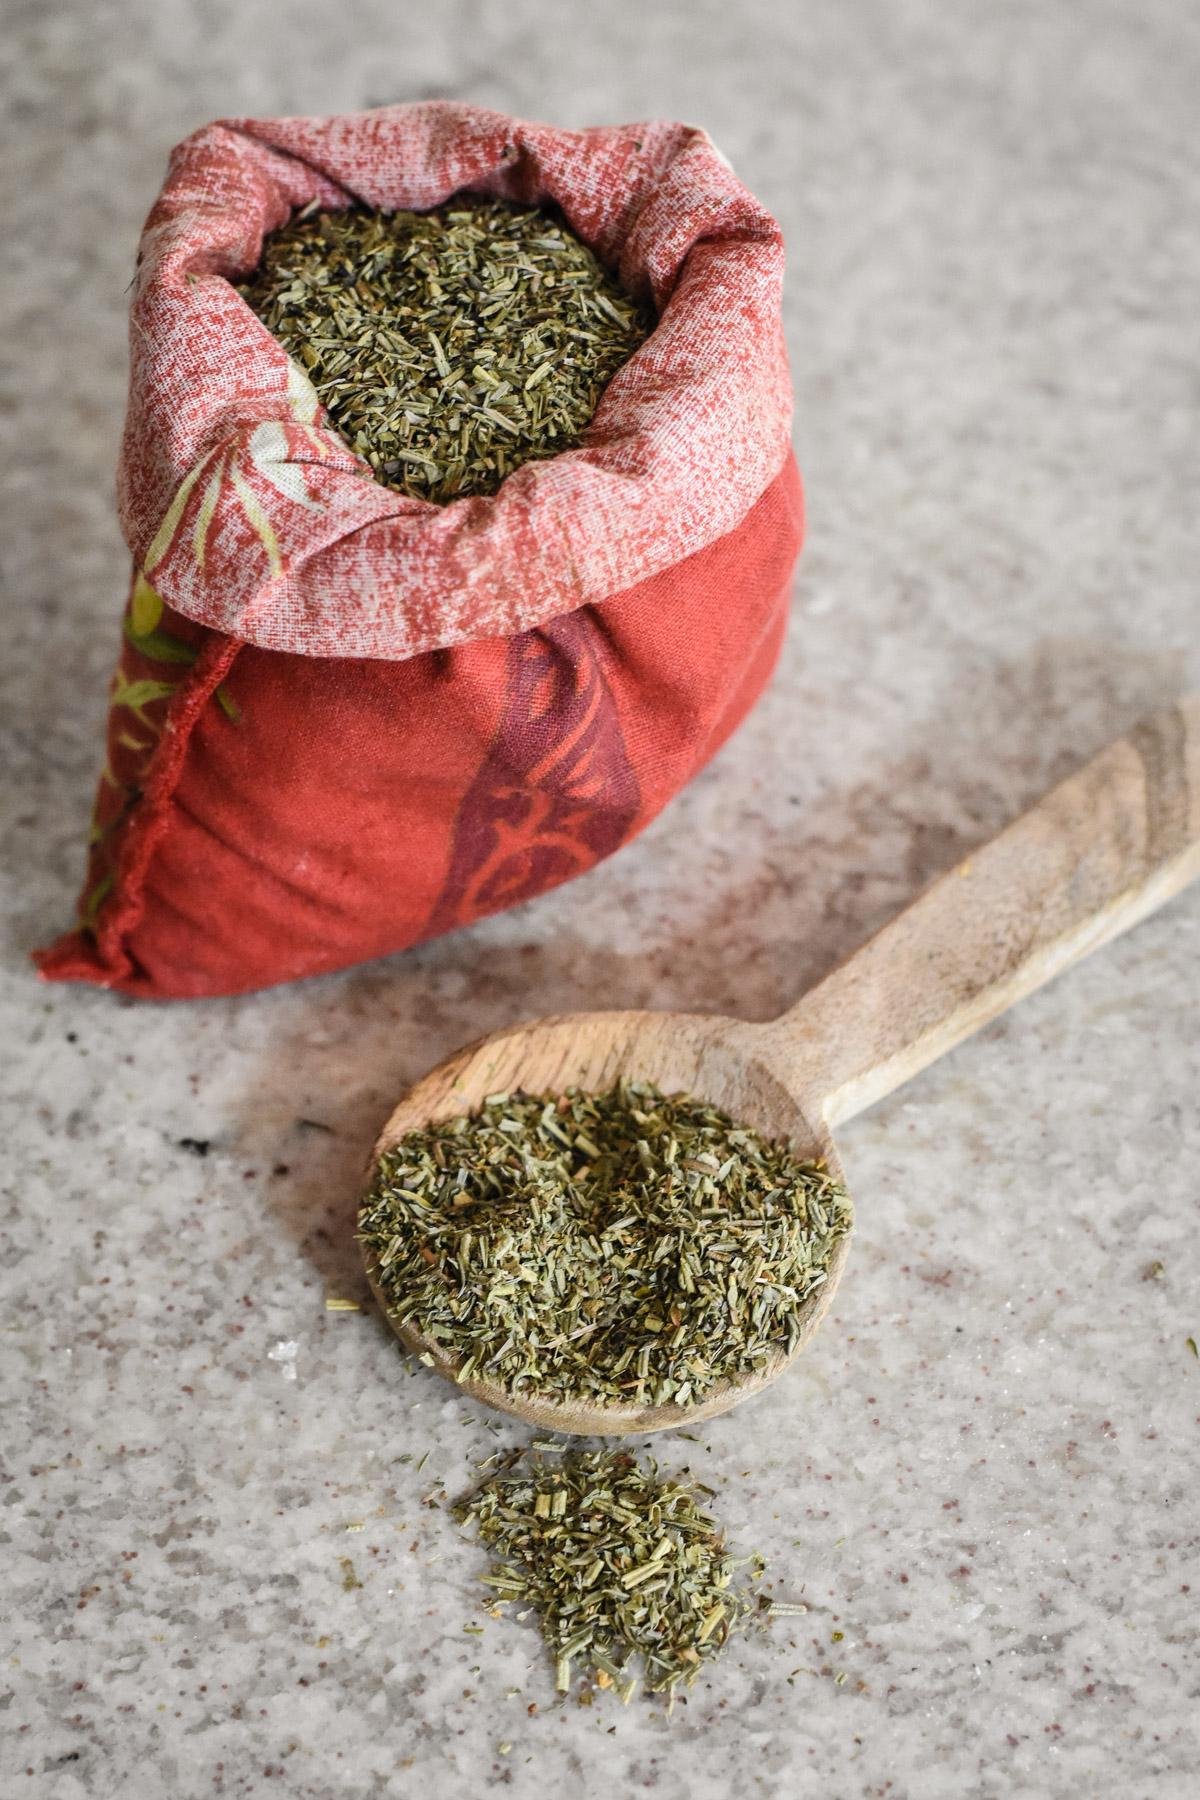 Herbes de Provence, a mix of dried herbs popular in the region, is key to the dish's signature flavor. (Audrey Le Goff)